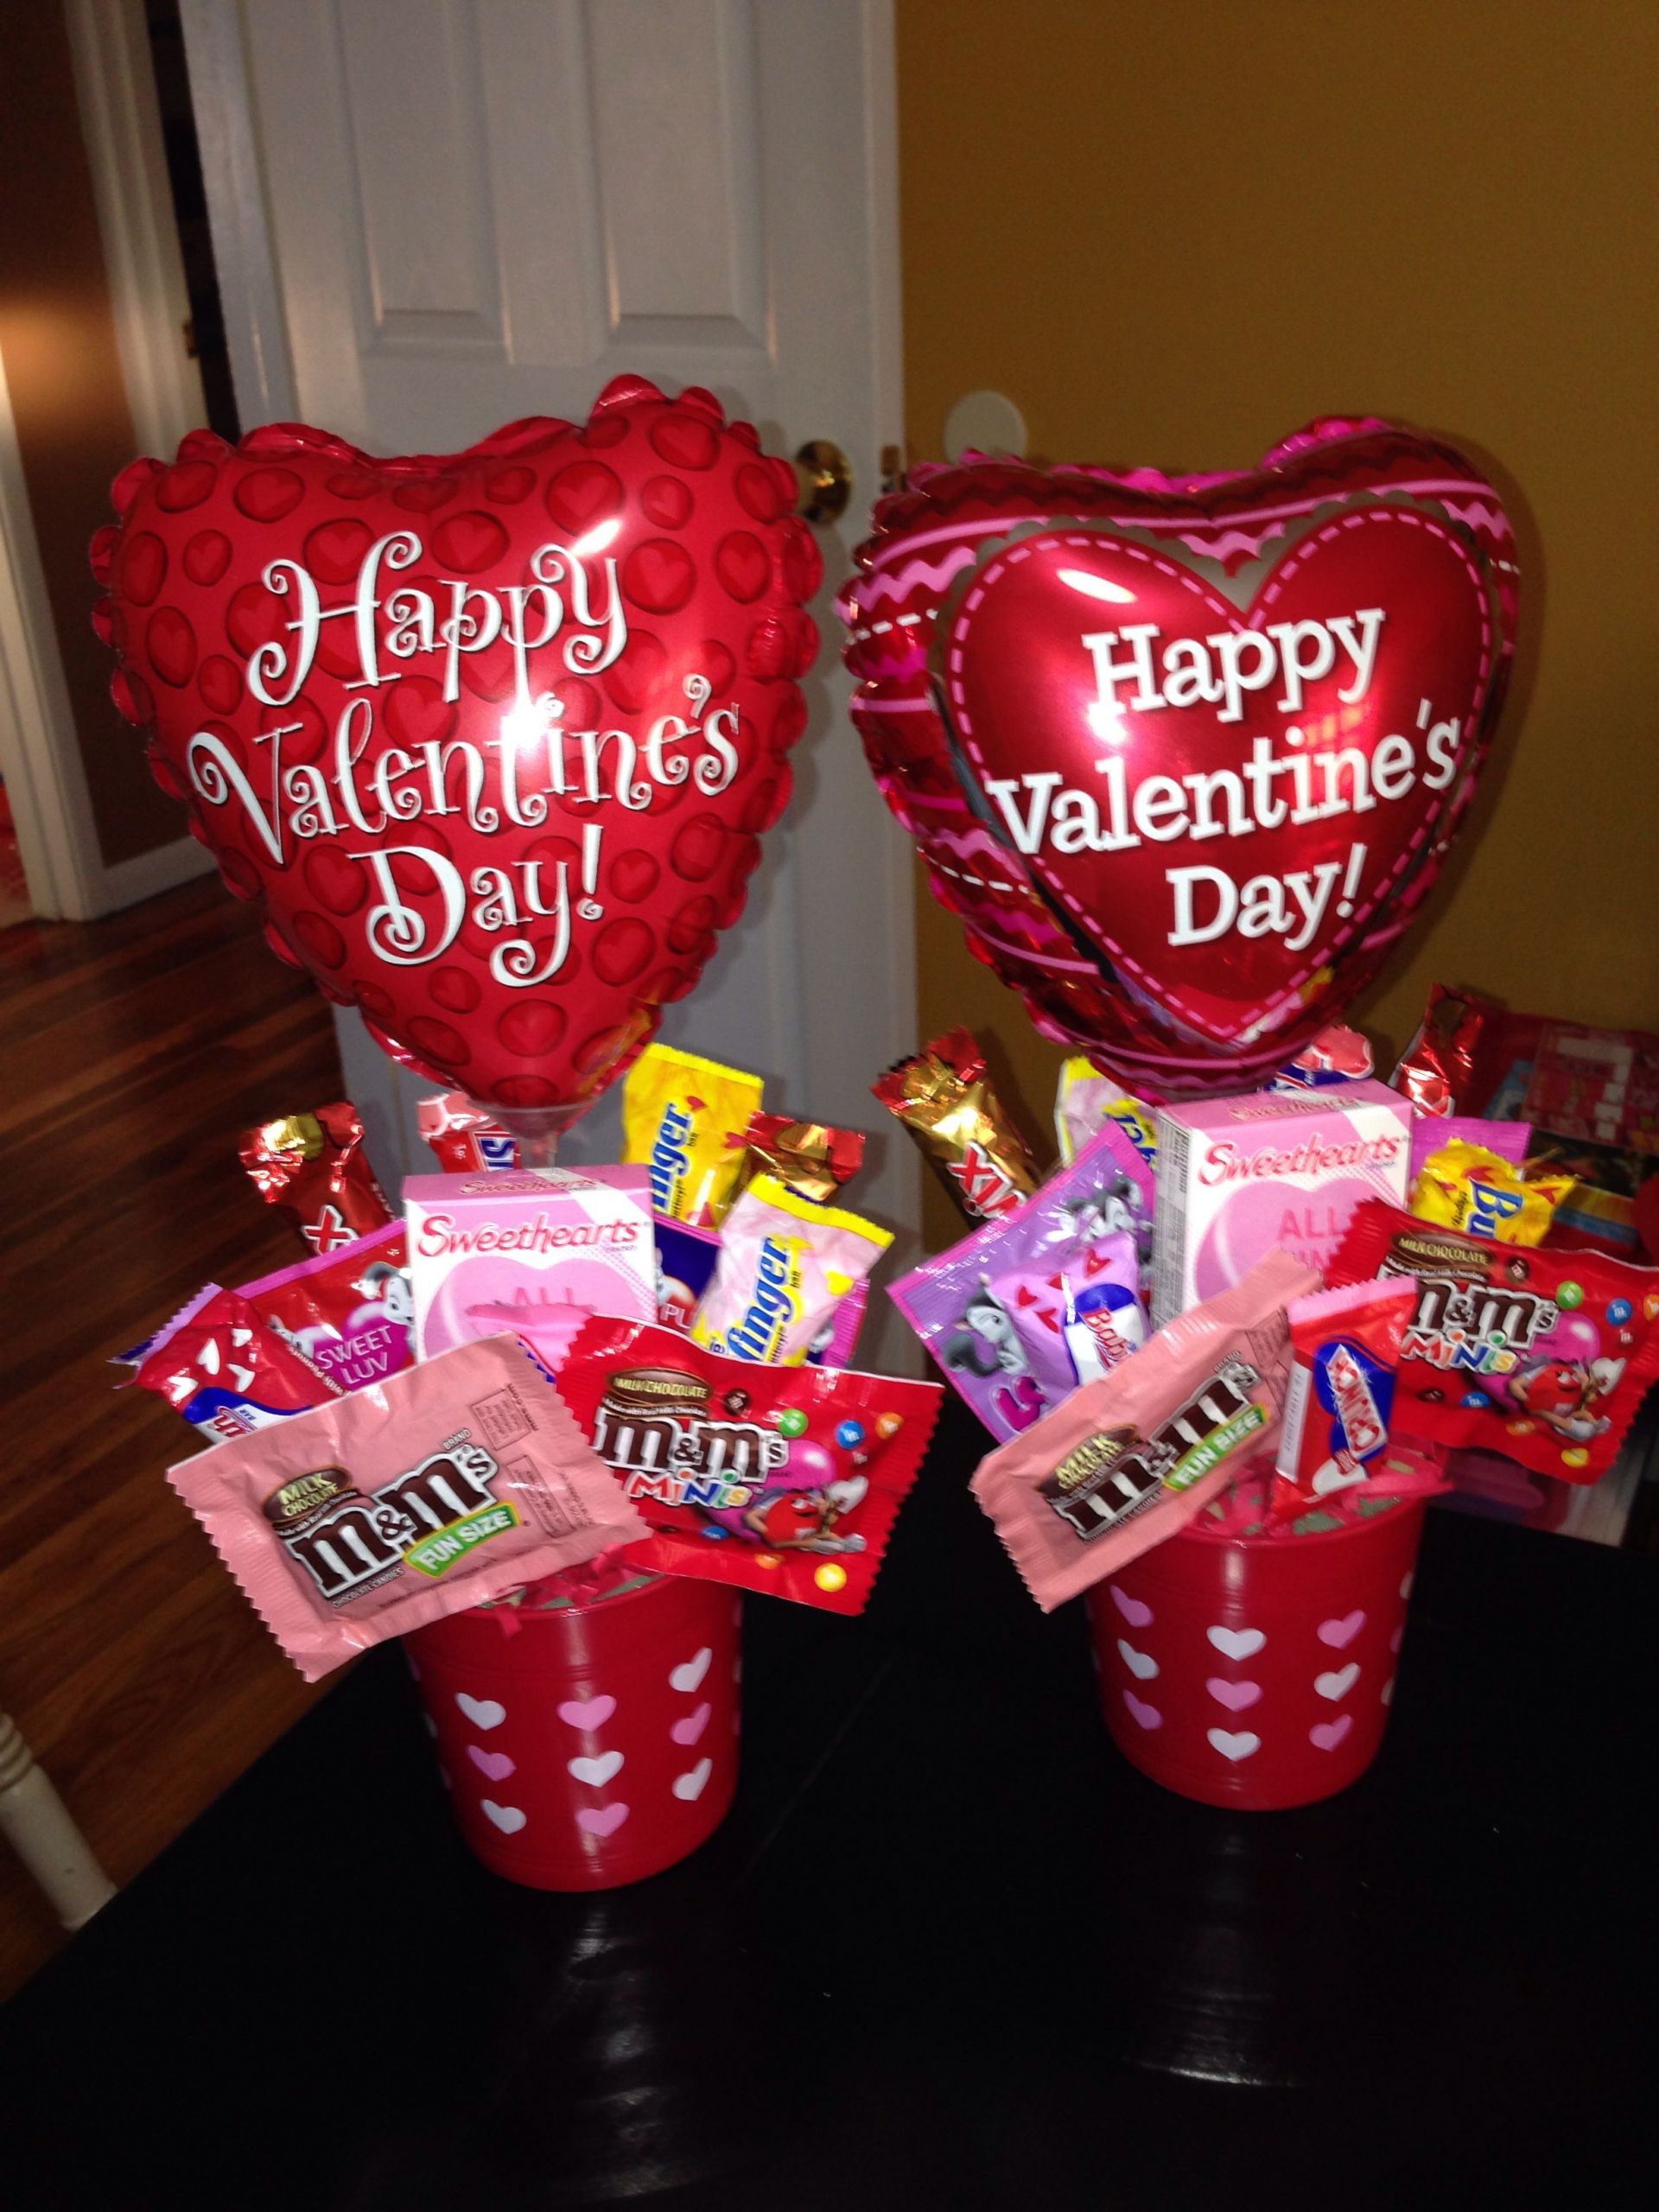 Candy Gift Baskets For Valentines Day
 Small valentines bouquets Candy bouquets